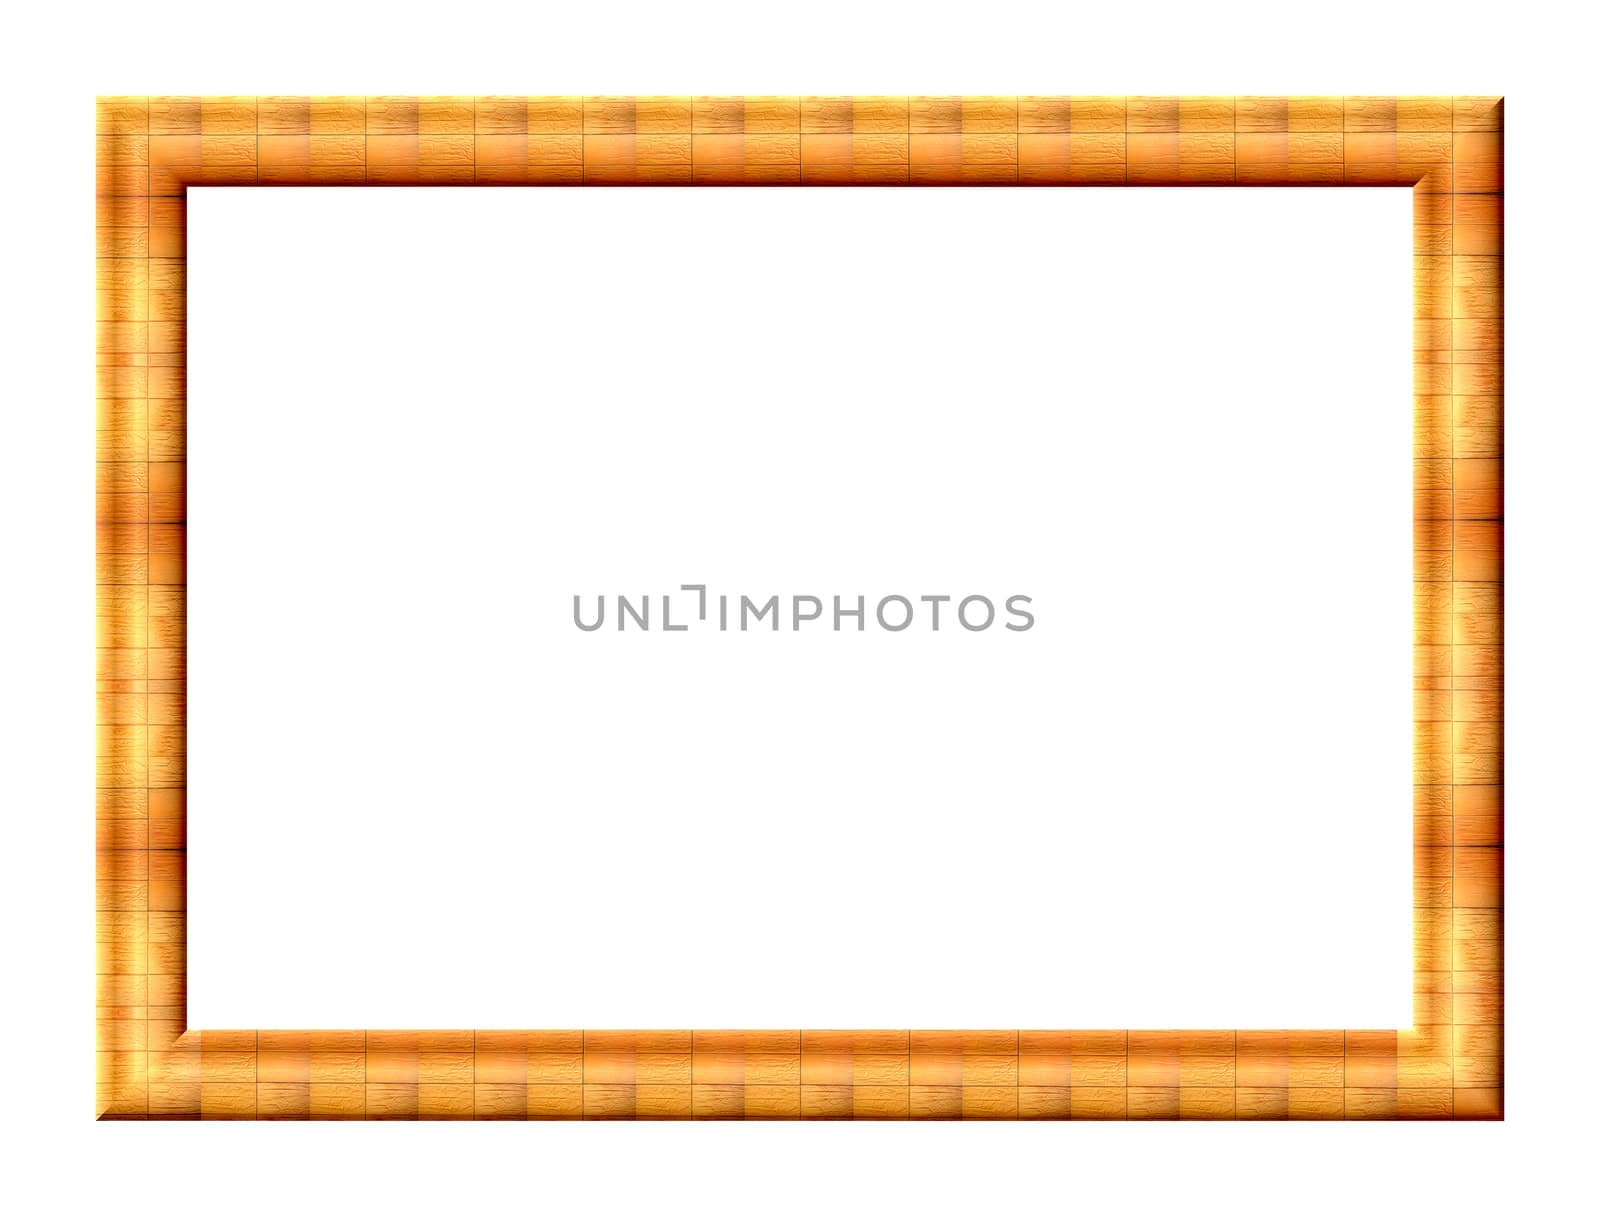 Rectangular blank photo frame with textured finishing tiles tan-orange colors on a white background